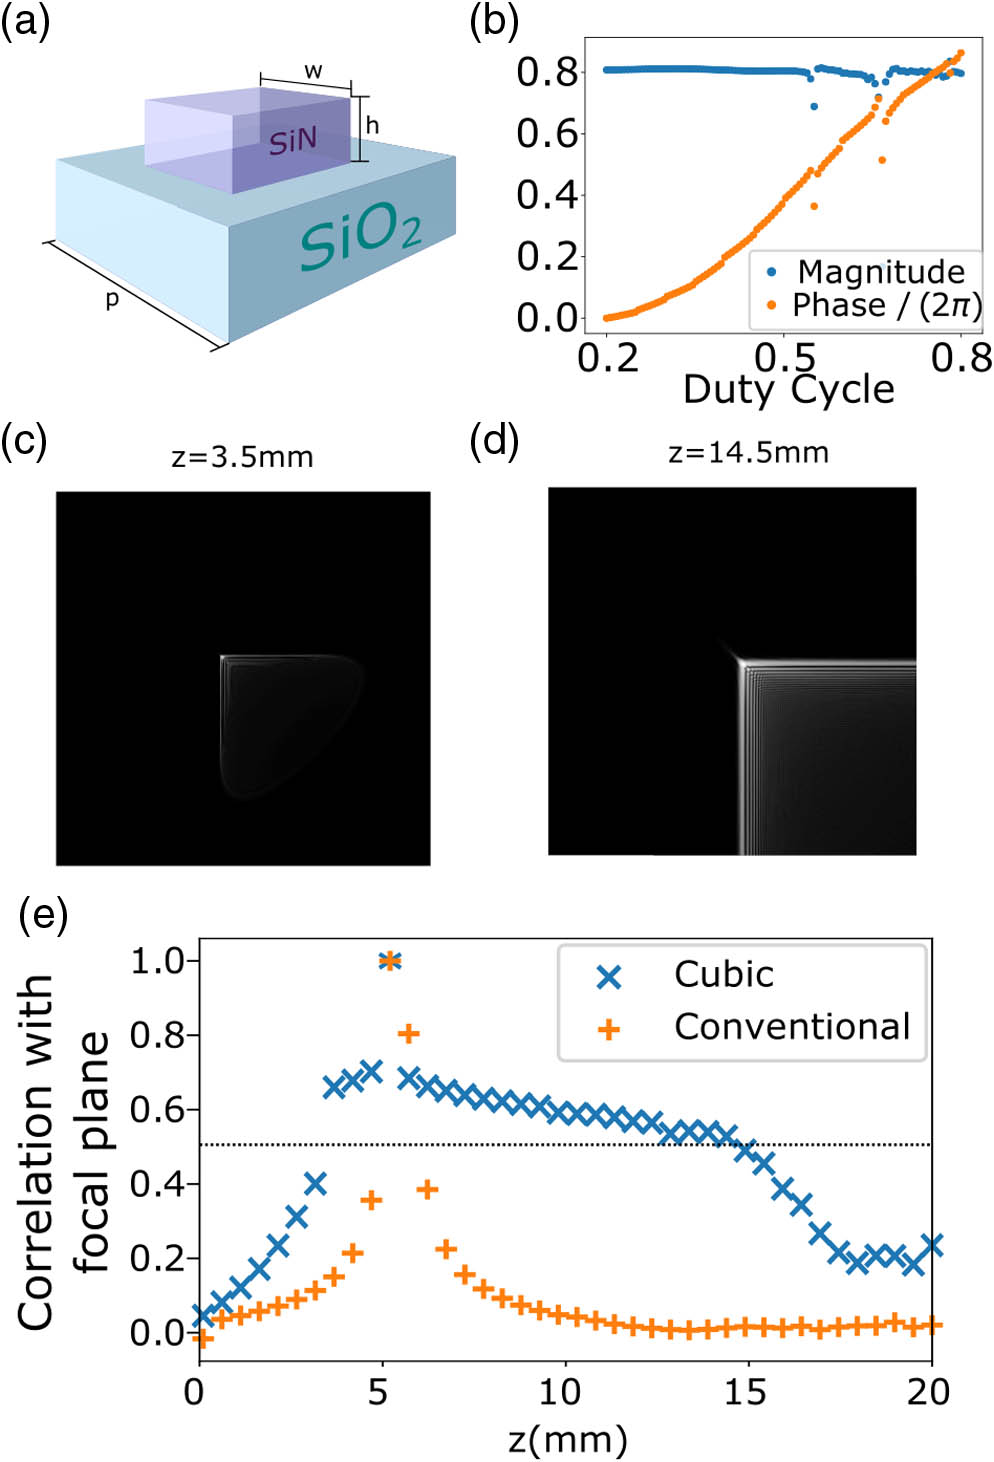 Scatterer and meta-optics design and simulation. (a) Schematic of h=633 nm thick SiN square posts on a silicon oxide substrate. The periodicity p is kept constant, and the width w is changed to cover the whole 0−2π phase. (b) Magnitude and phase of the transmitted light for a plane wave input with p=350 nm. (c) and (d) are simulated PSFs of the EDOF meta-optic at object distances of 3.5 mm and 14.5 mm, respectively. (e) Correlation plot of simulated PSF against the PSF at the central focal point for a cubic meta-optic and a conventional metalens. The correlation clearly shows the extension of the depth of focus.